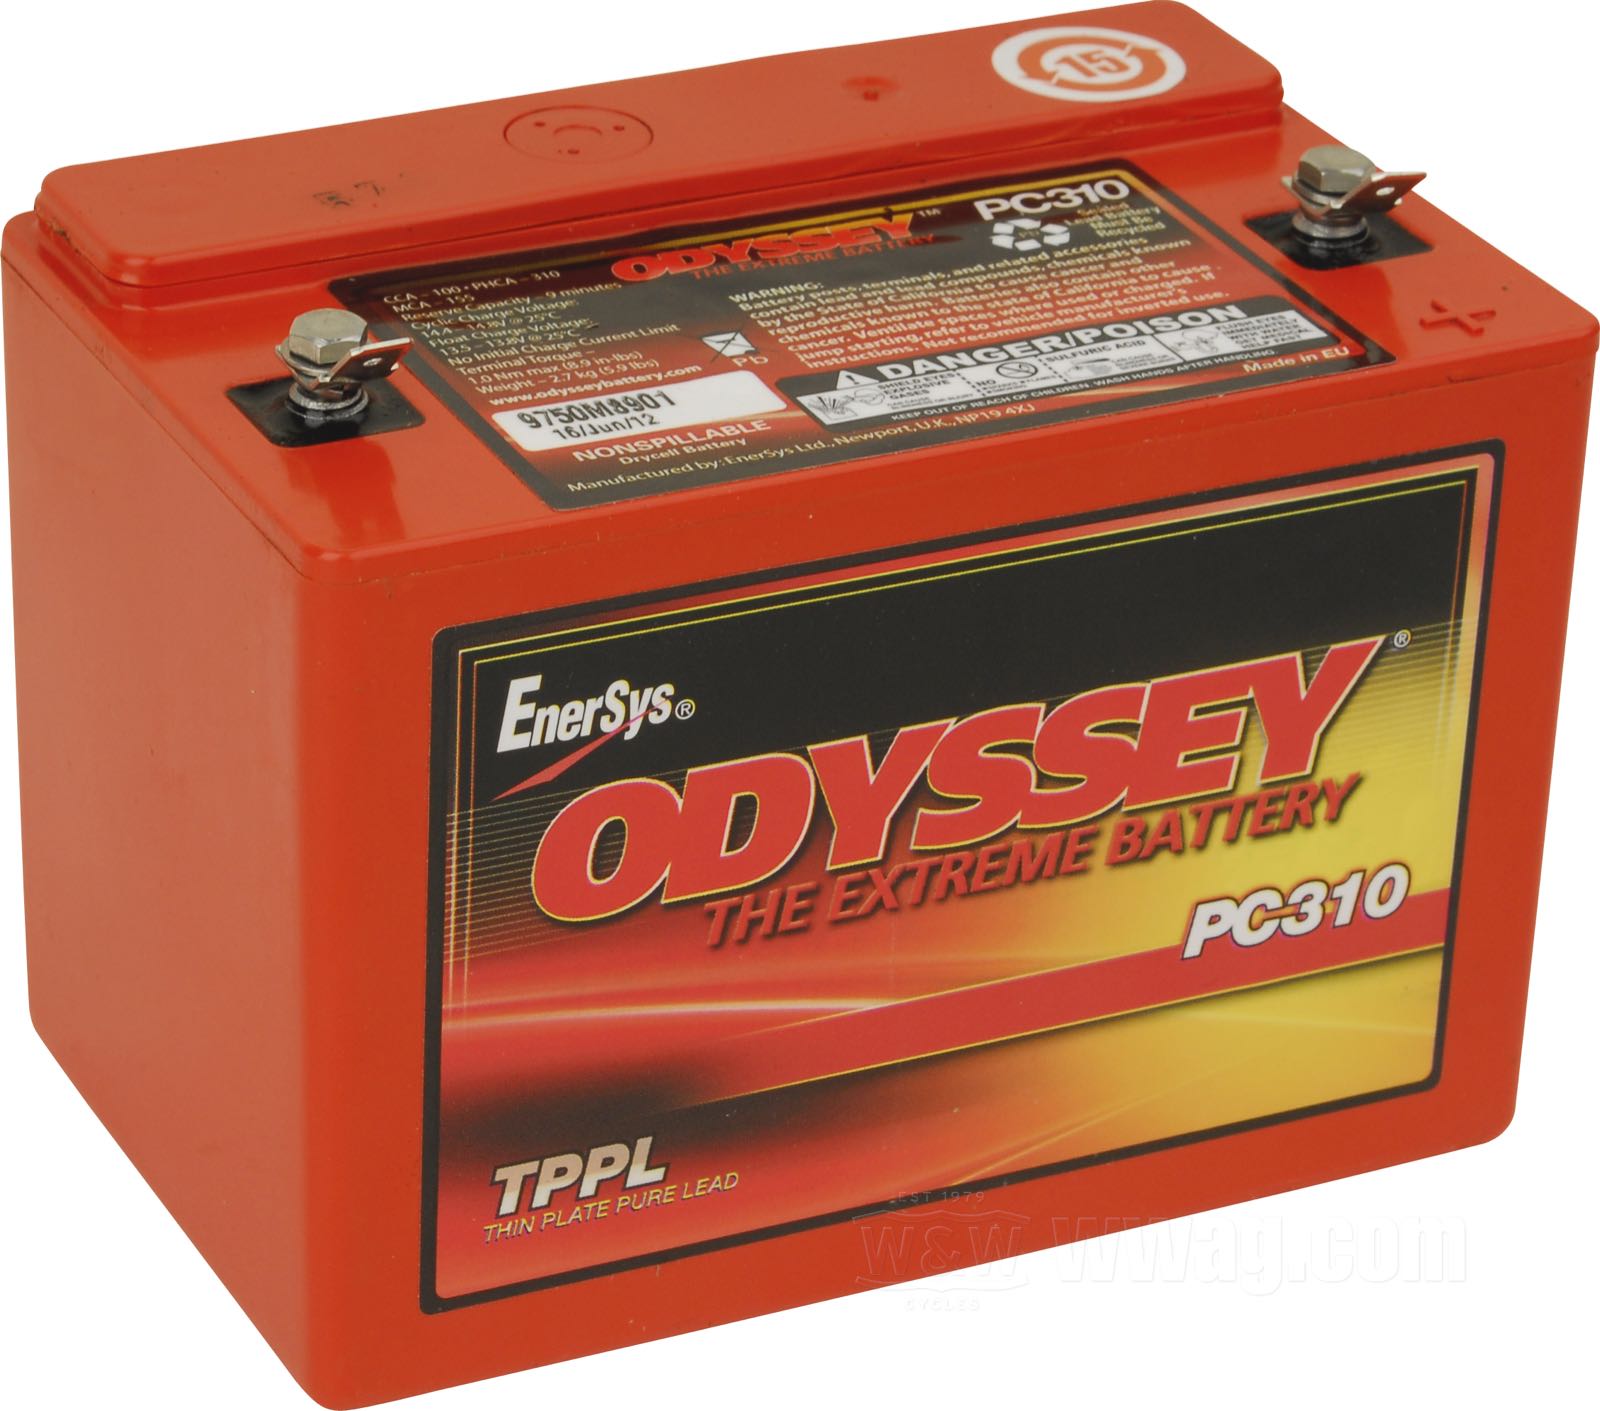 W&W Cycles - 6 V Antigravity AG-802 Lithium Ion Battery for Harley-Davidson